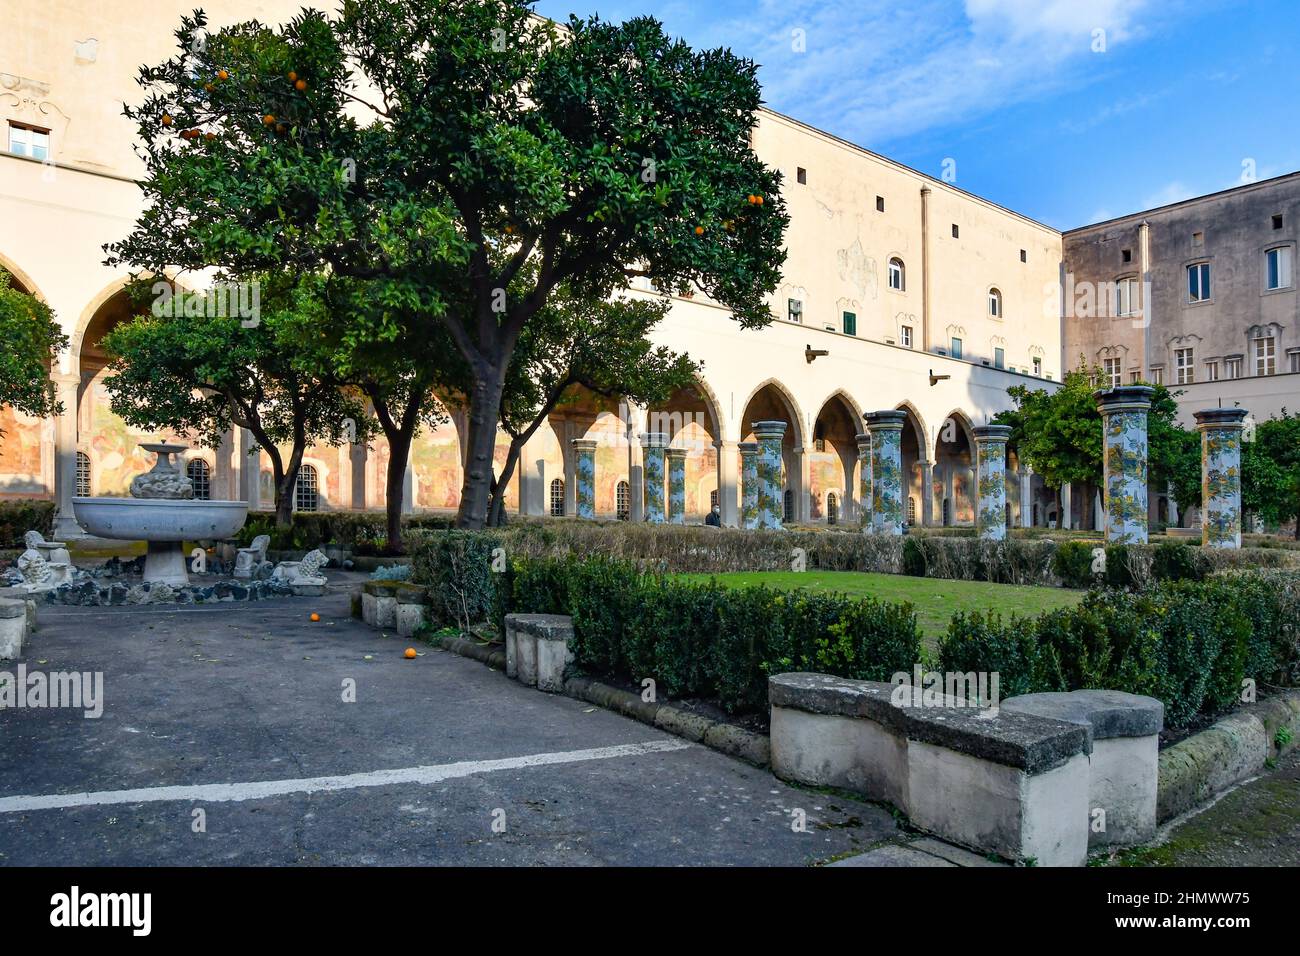 Naples Italy 02 13 2022 The Inner Courtyard Of The Monastery Of Santa Chiara Decorated With